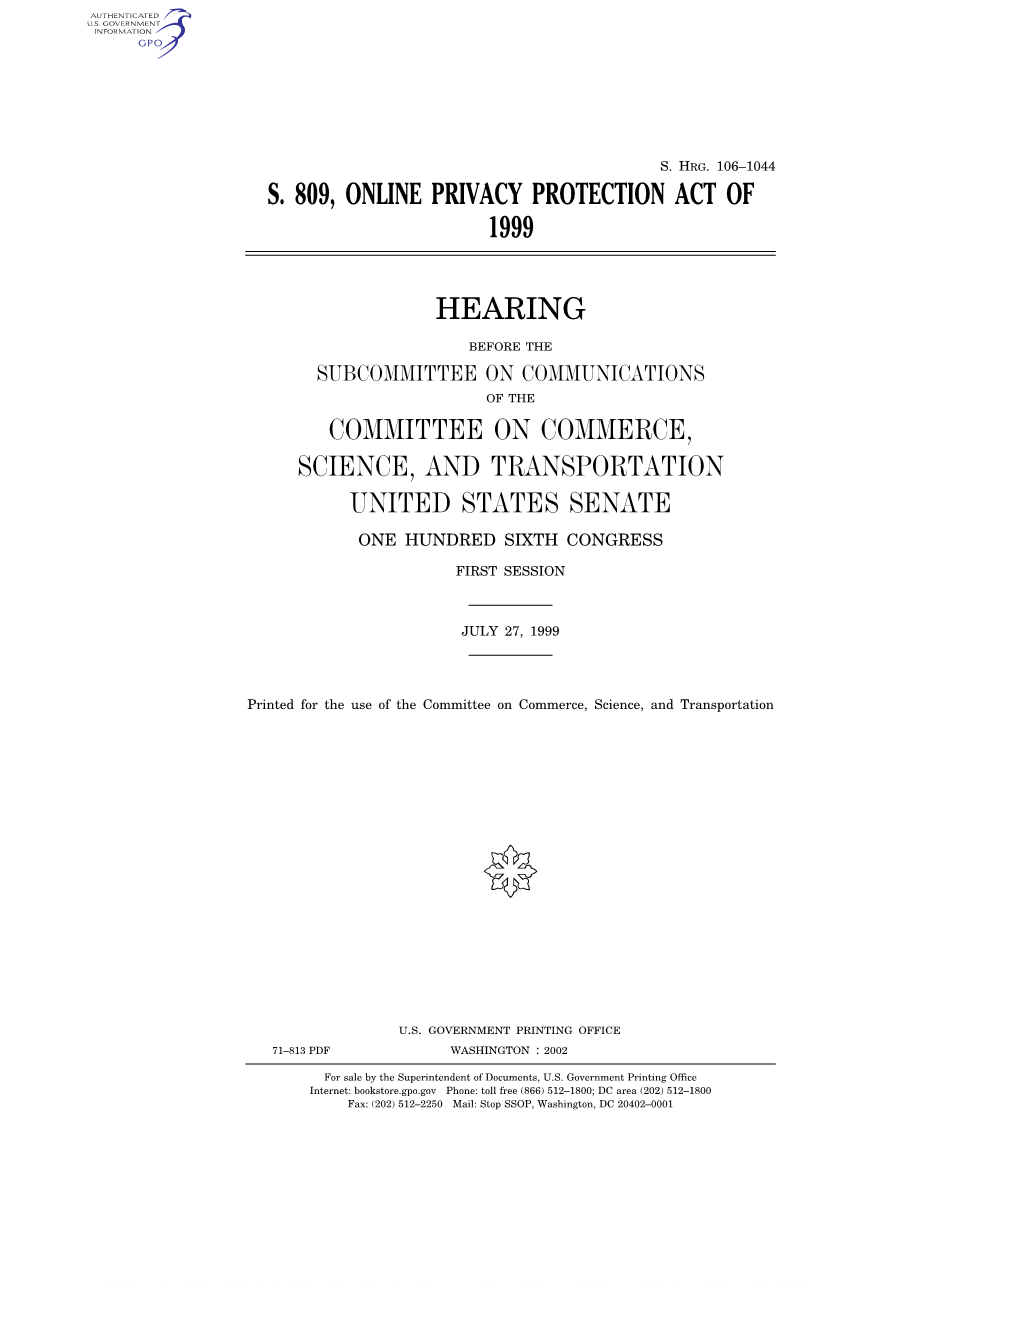 S. 809, Online Privacy Protection Act of 1999 Hearing